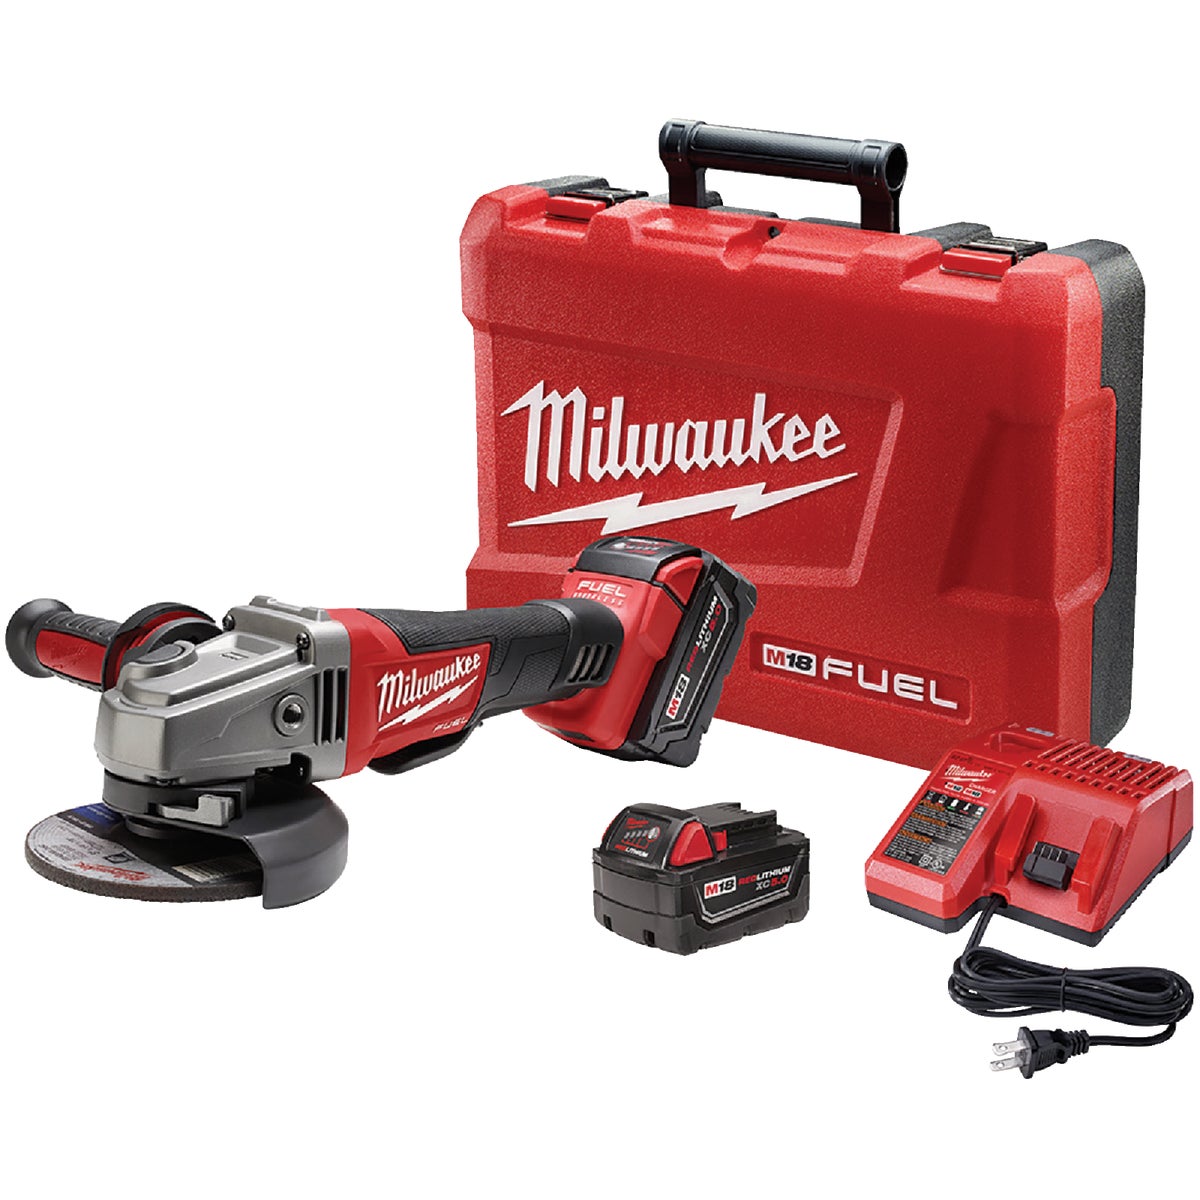 Milwaukee M18 FUEL 18-Volt Lithium-Ion 4-1/2 In - 5 In. Brushless Cordless Angle Grinder Kit with Paddle Switch, No-Lock